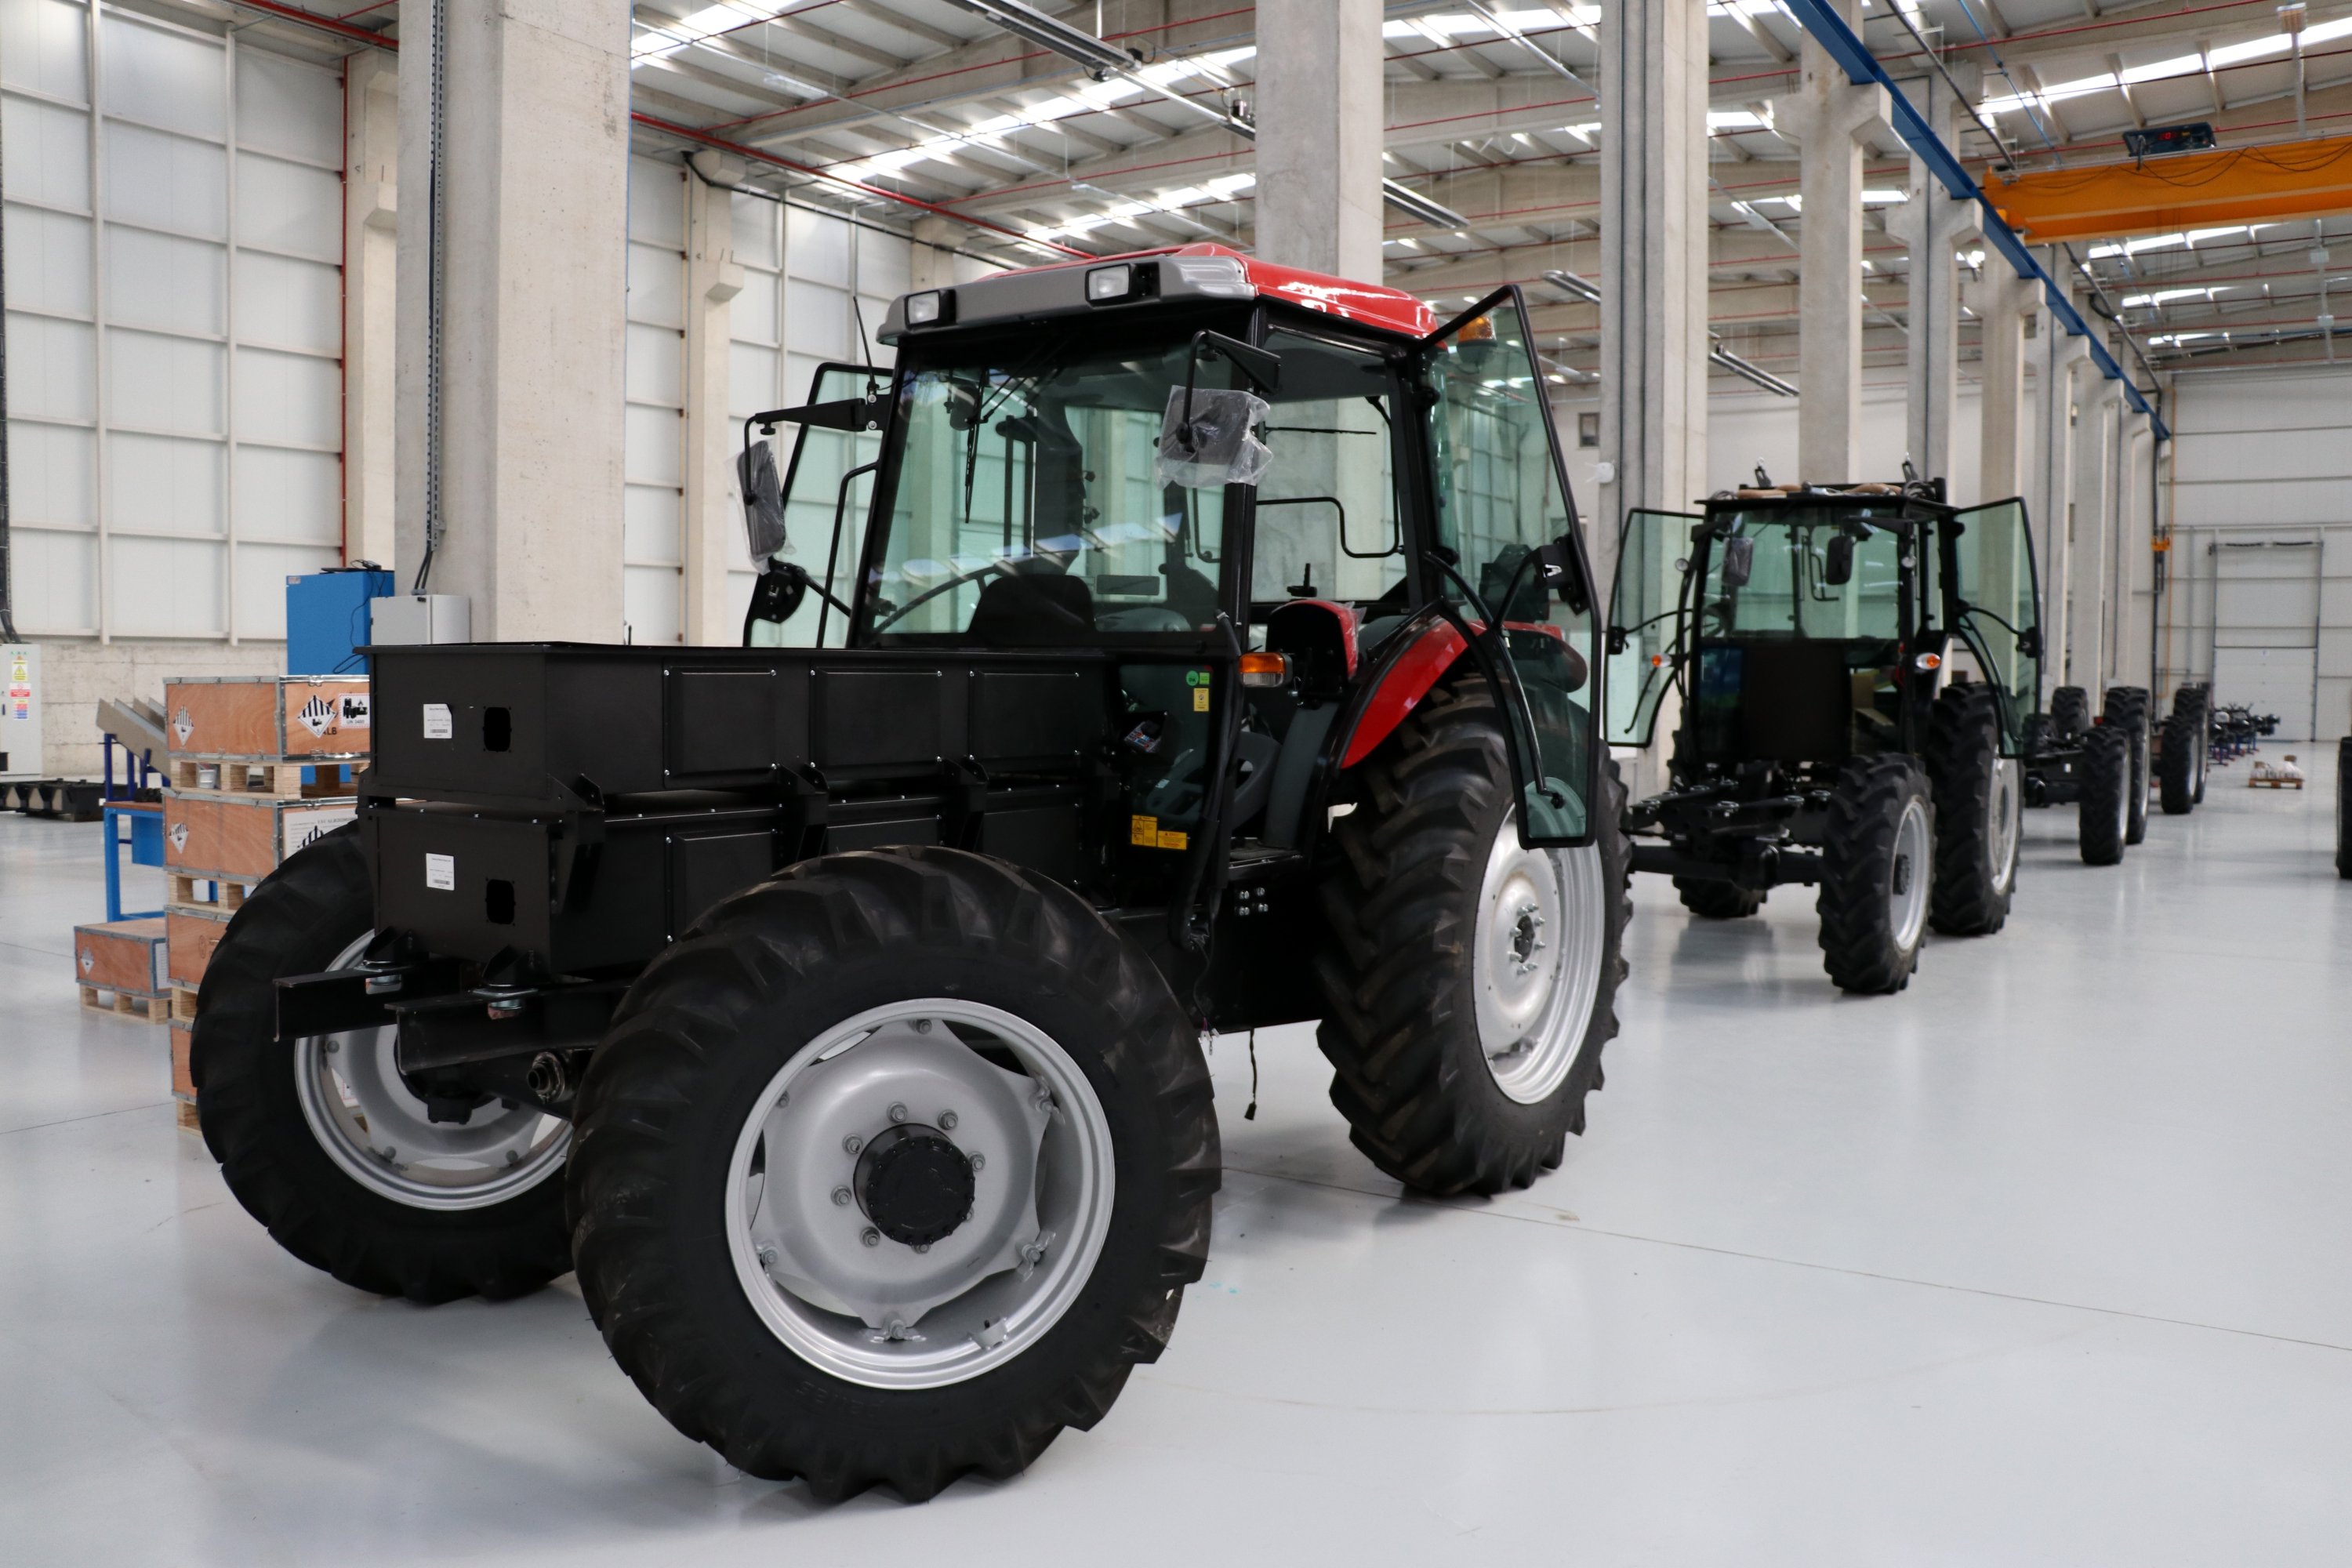 turkish king size electric tractor ready for mass production daily sabah